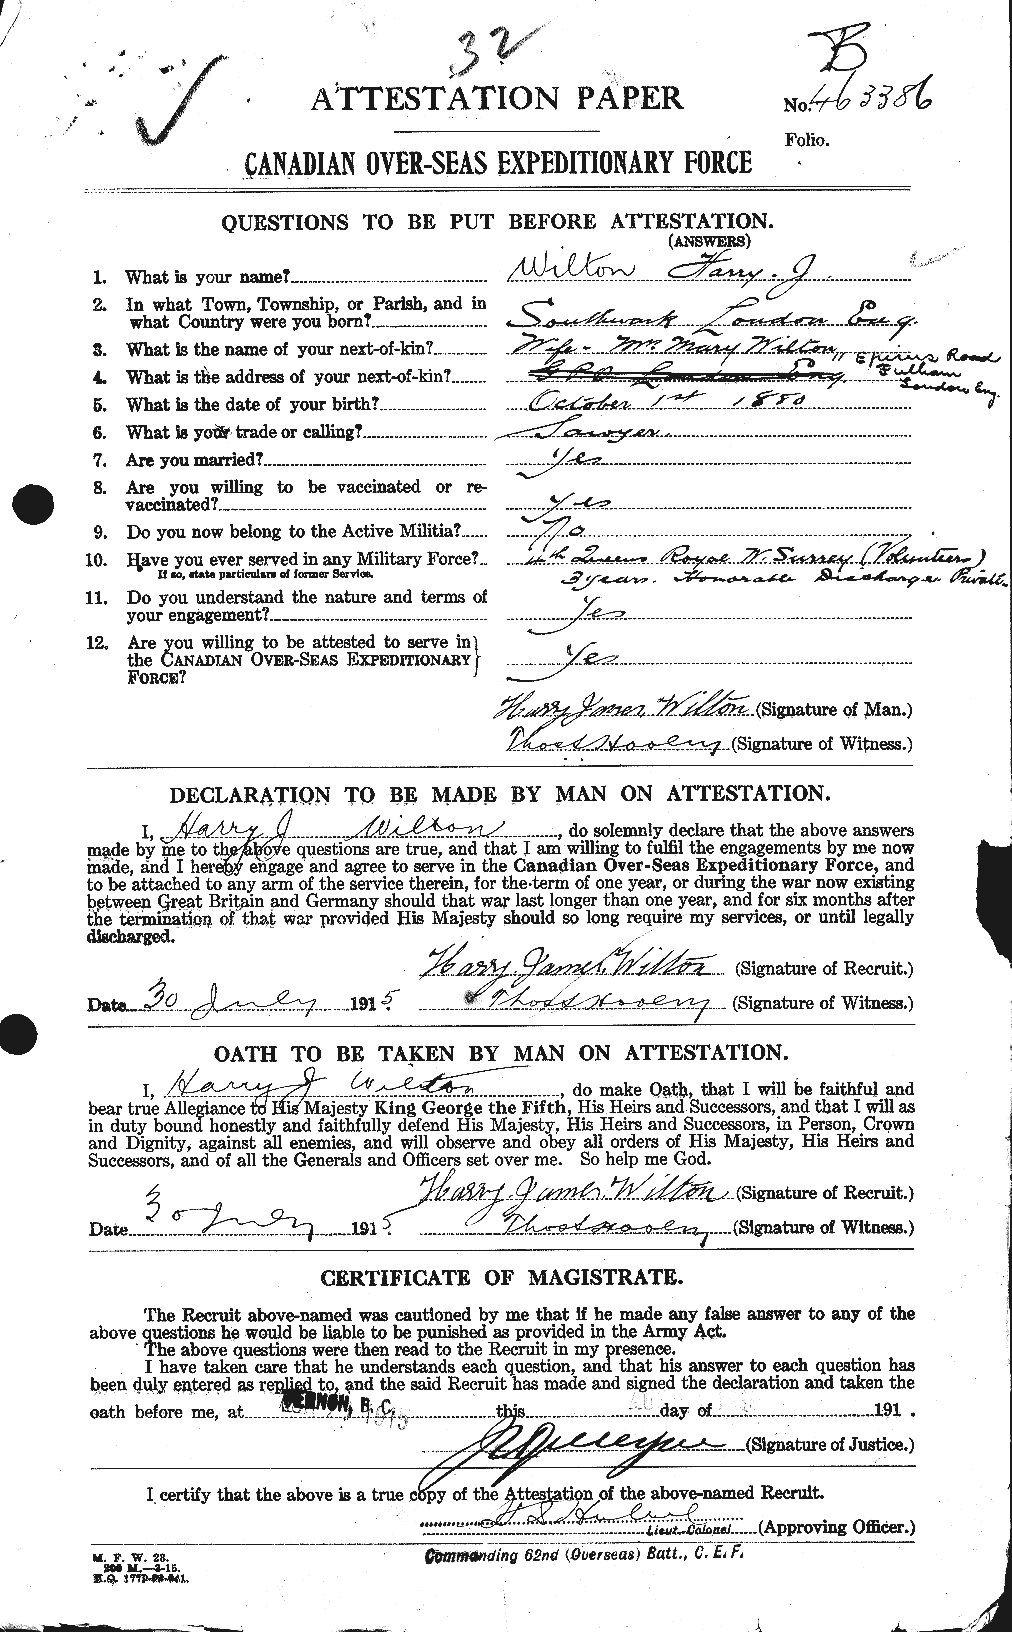 Personnel Records of the First World War - CEF 684155a